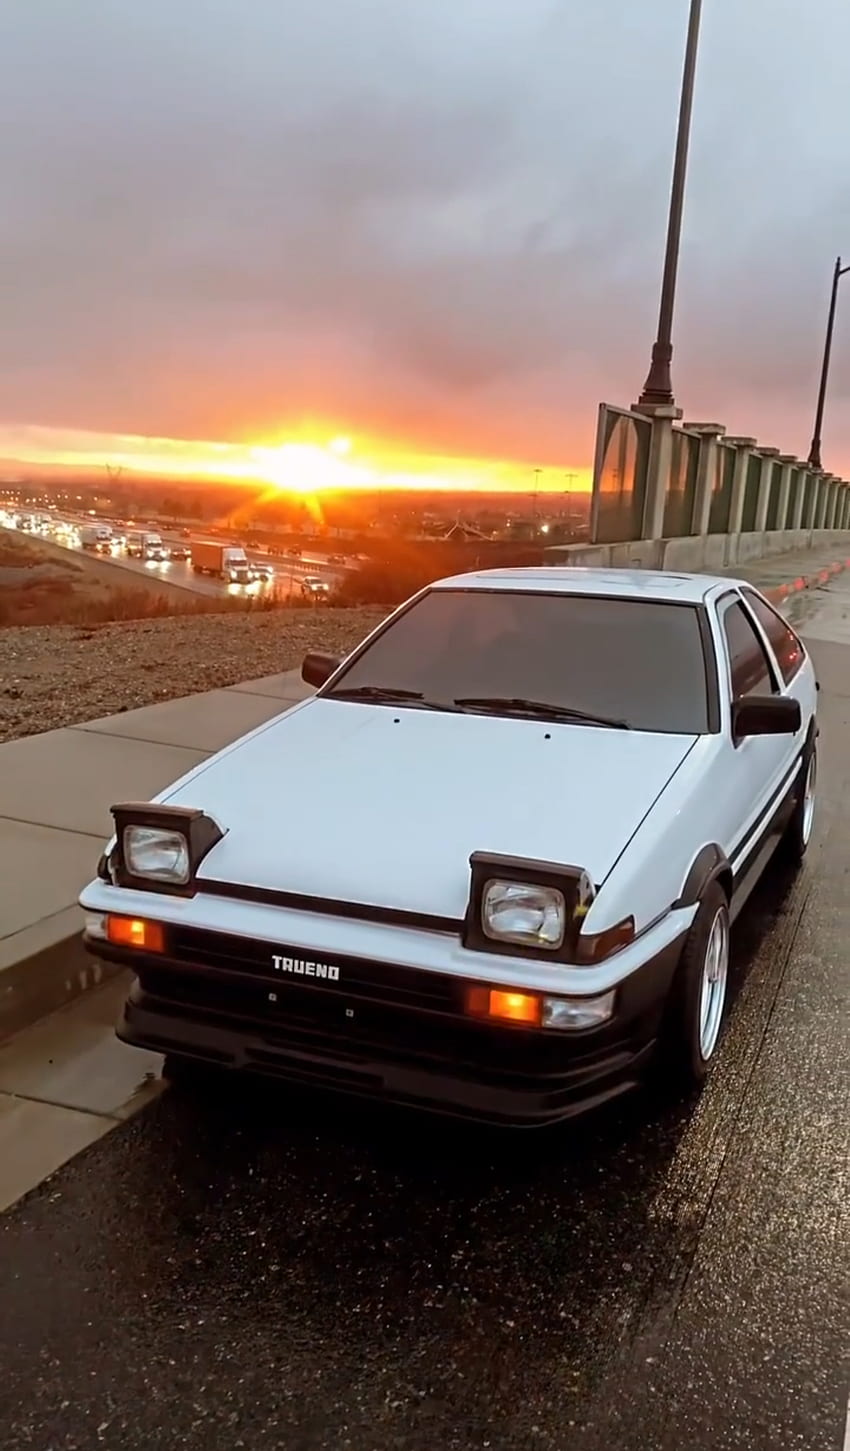 Live Wallpapers - NFS 19 AE86 - YouTube